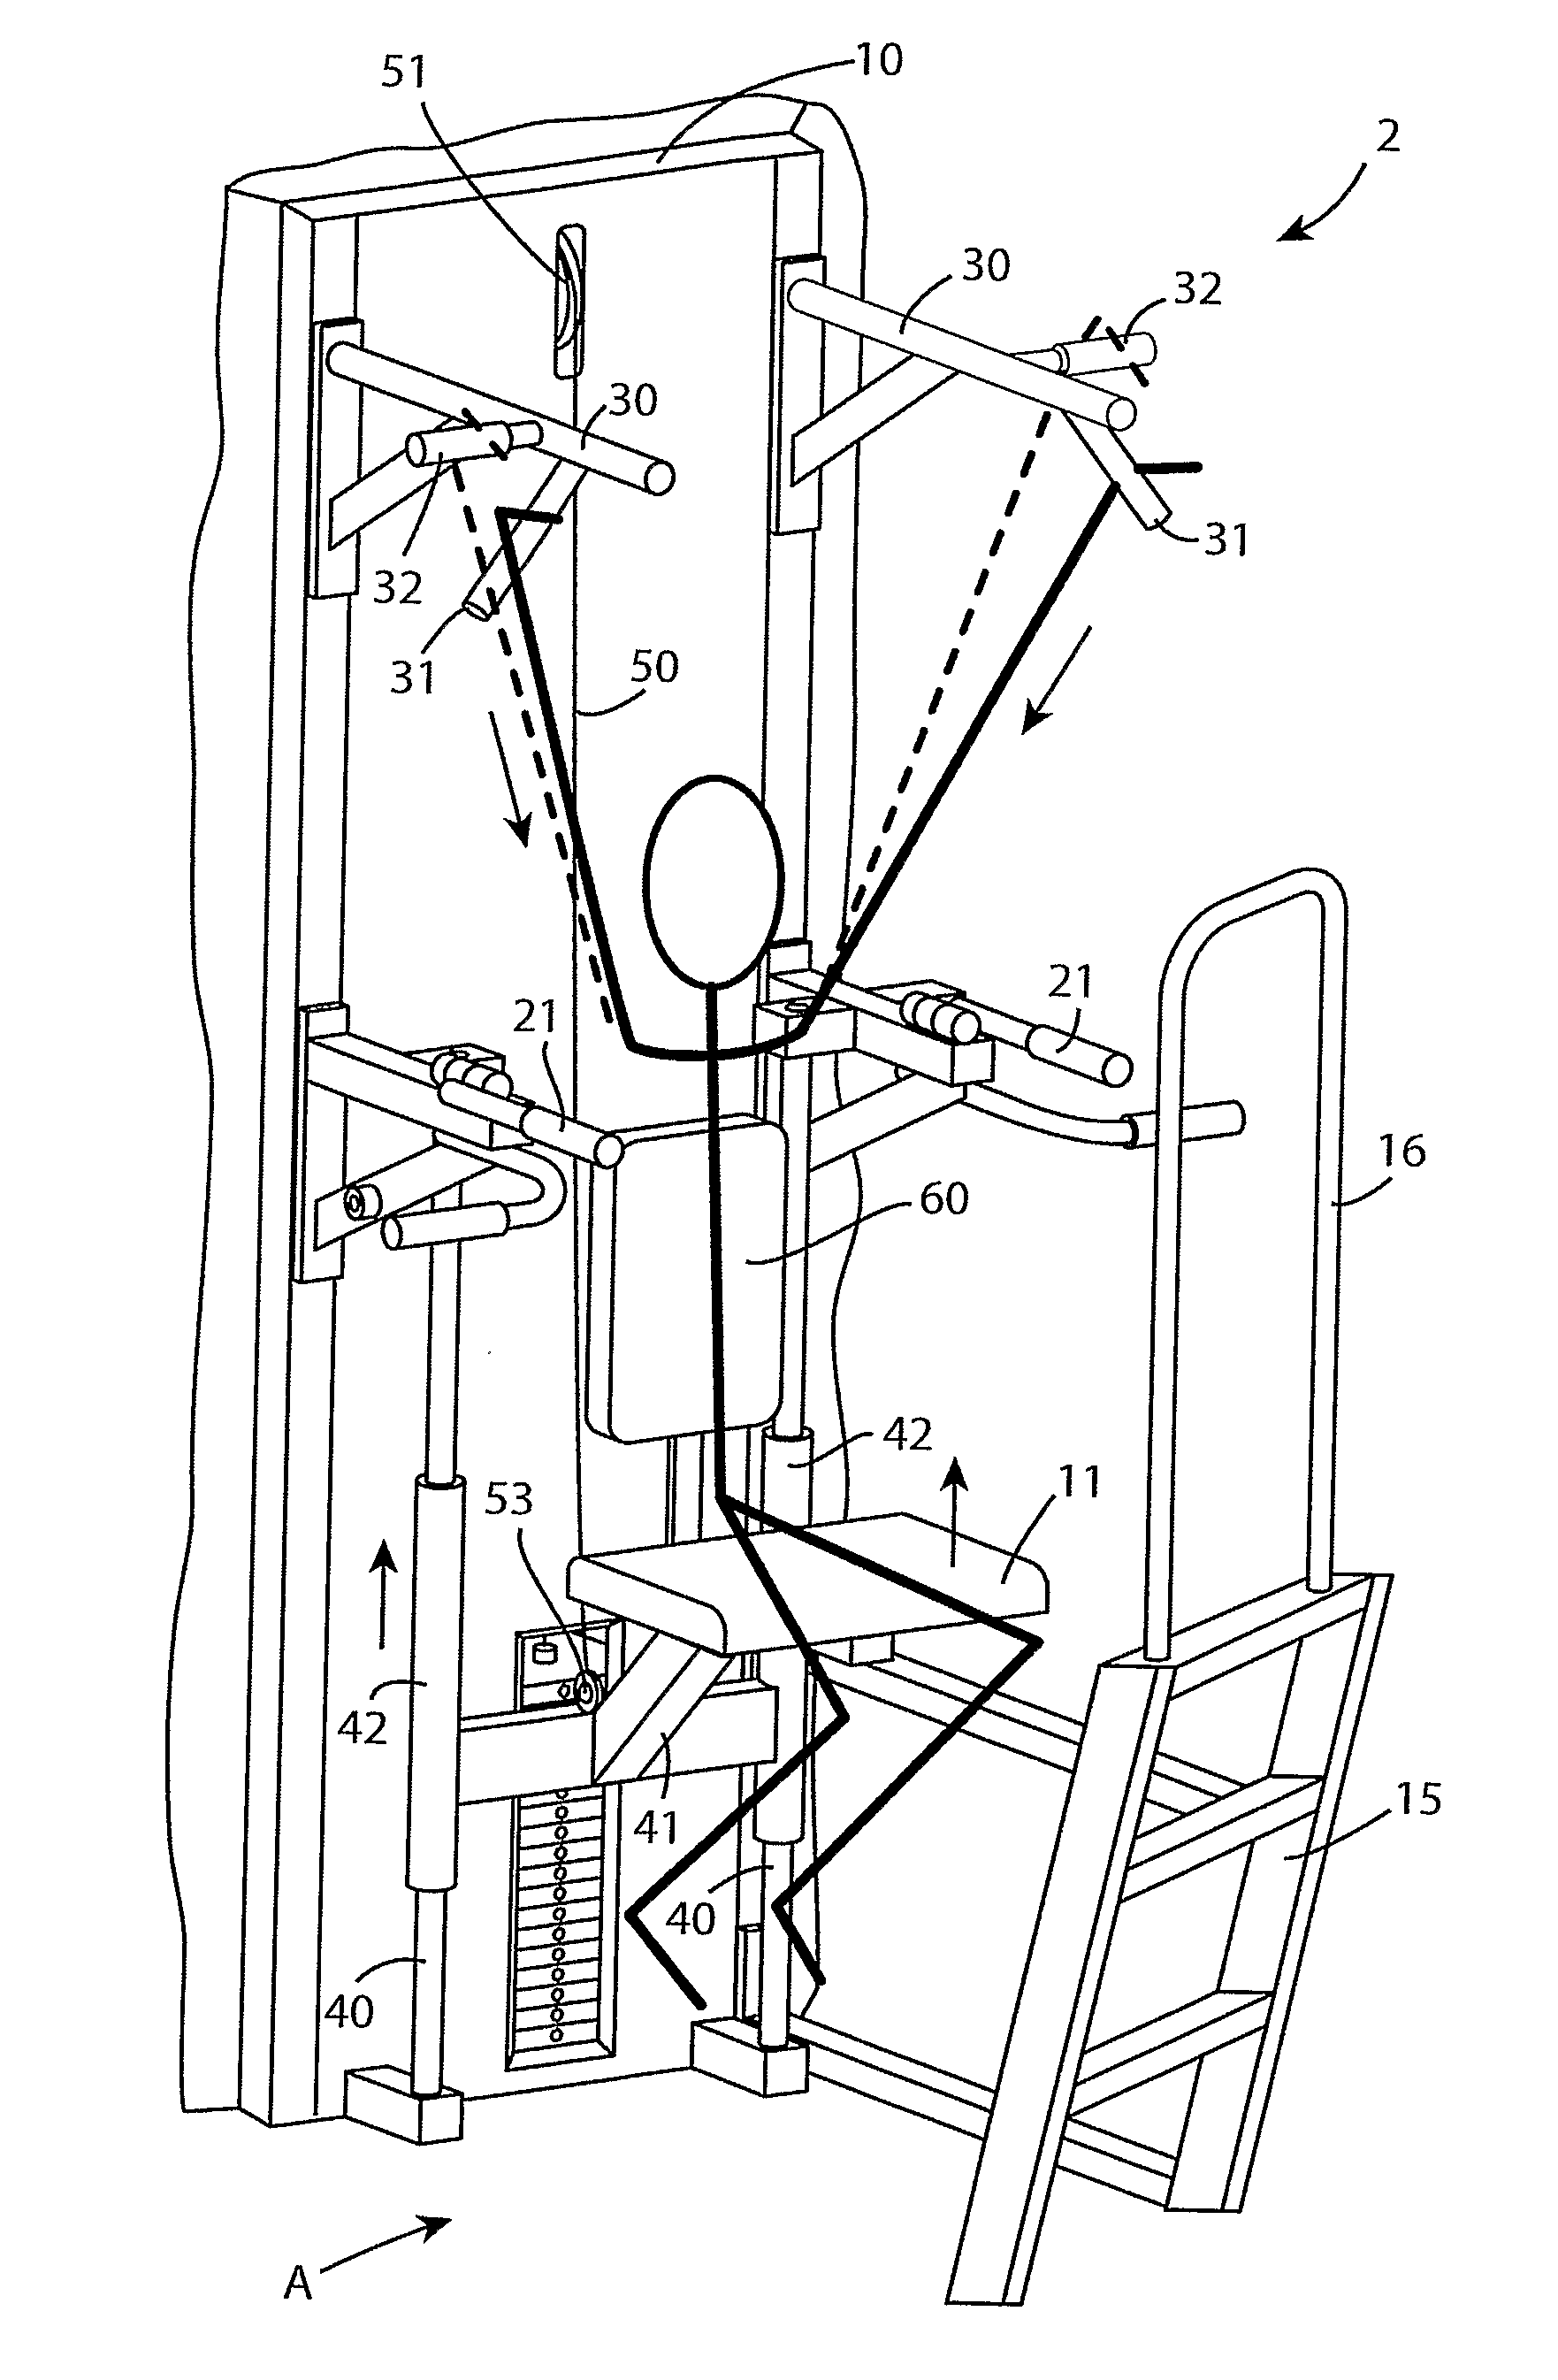 Apparatus for Exercising the Chest and Back